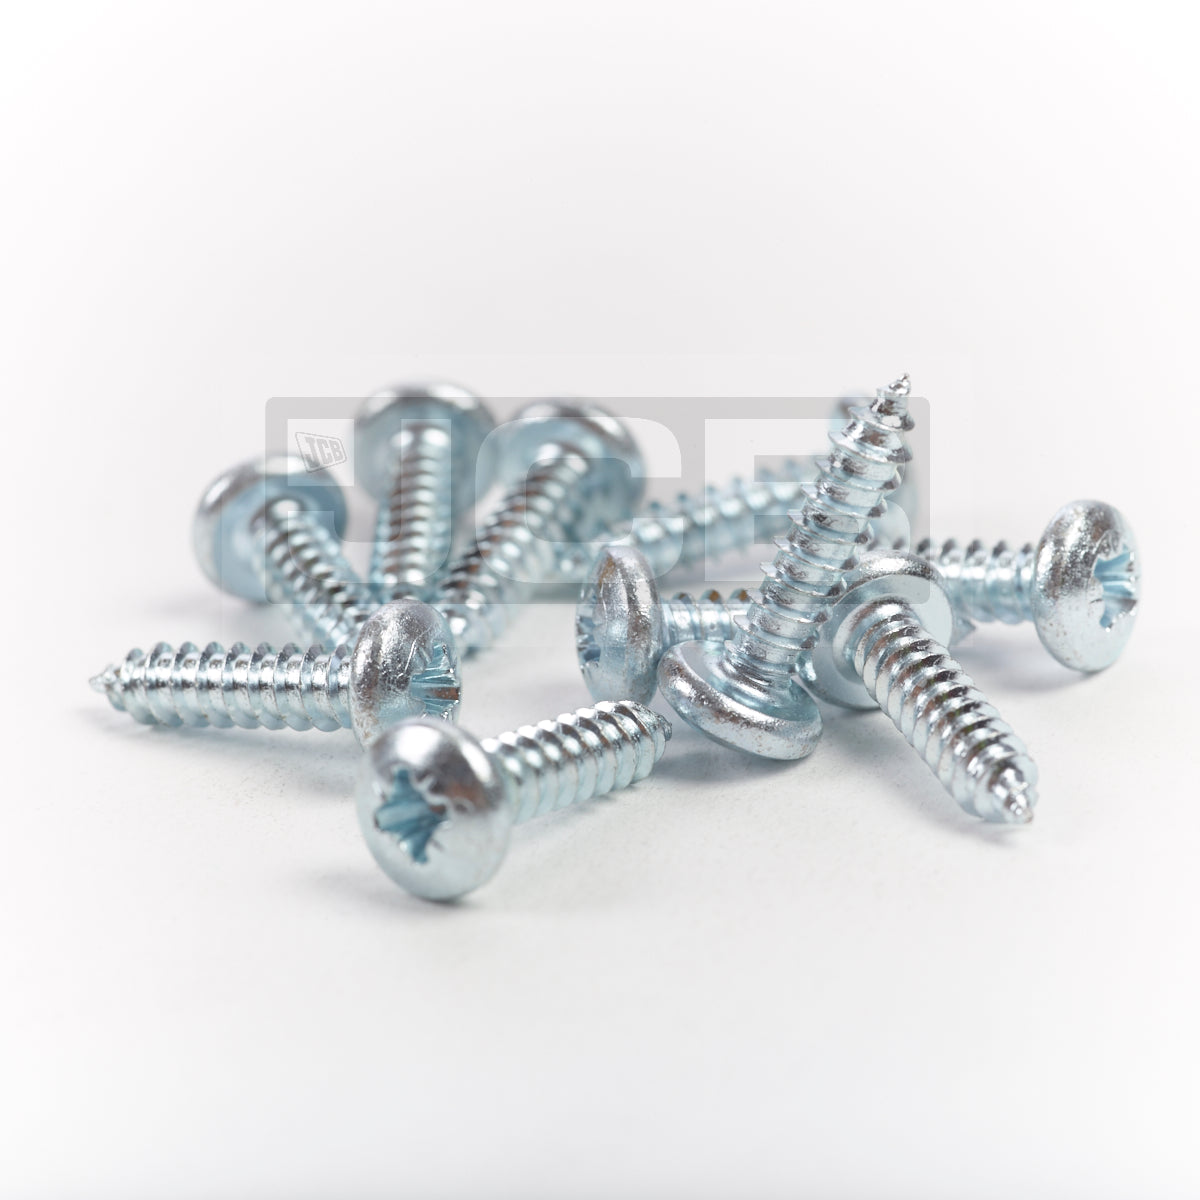 JCB Self Tapping Screw 3/4 inch Panhead : 1430/0304 (Pack of 10)